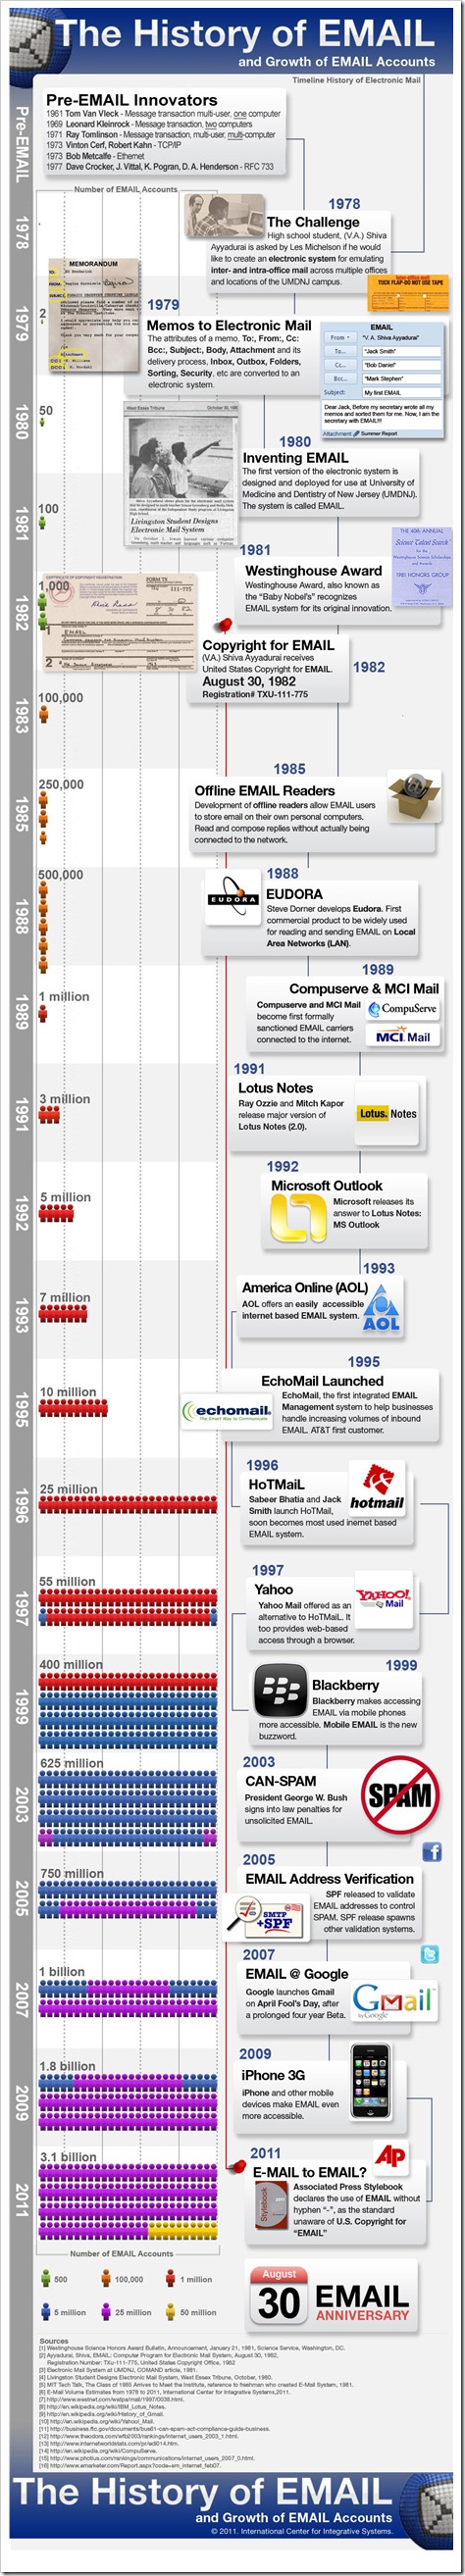 inventing email thumb - The History of Email [Infograph] and its 30th Anniversary